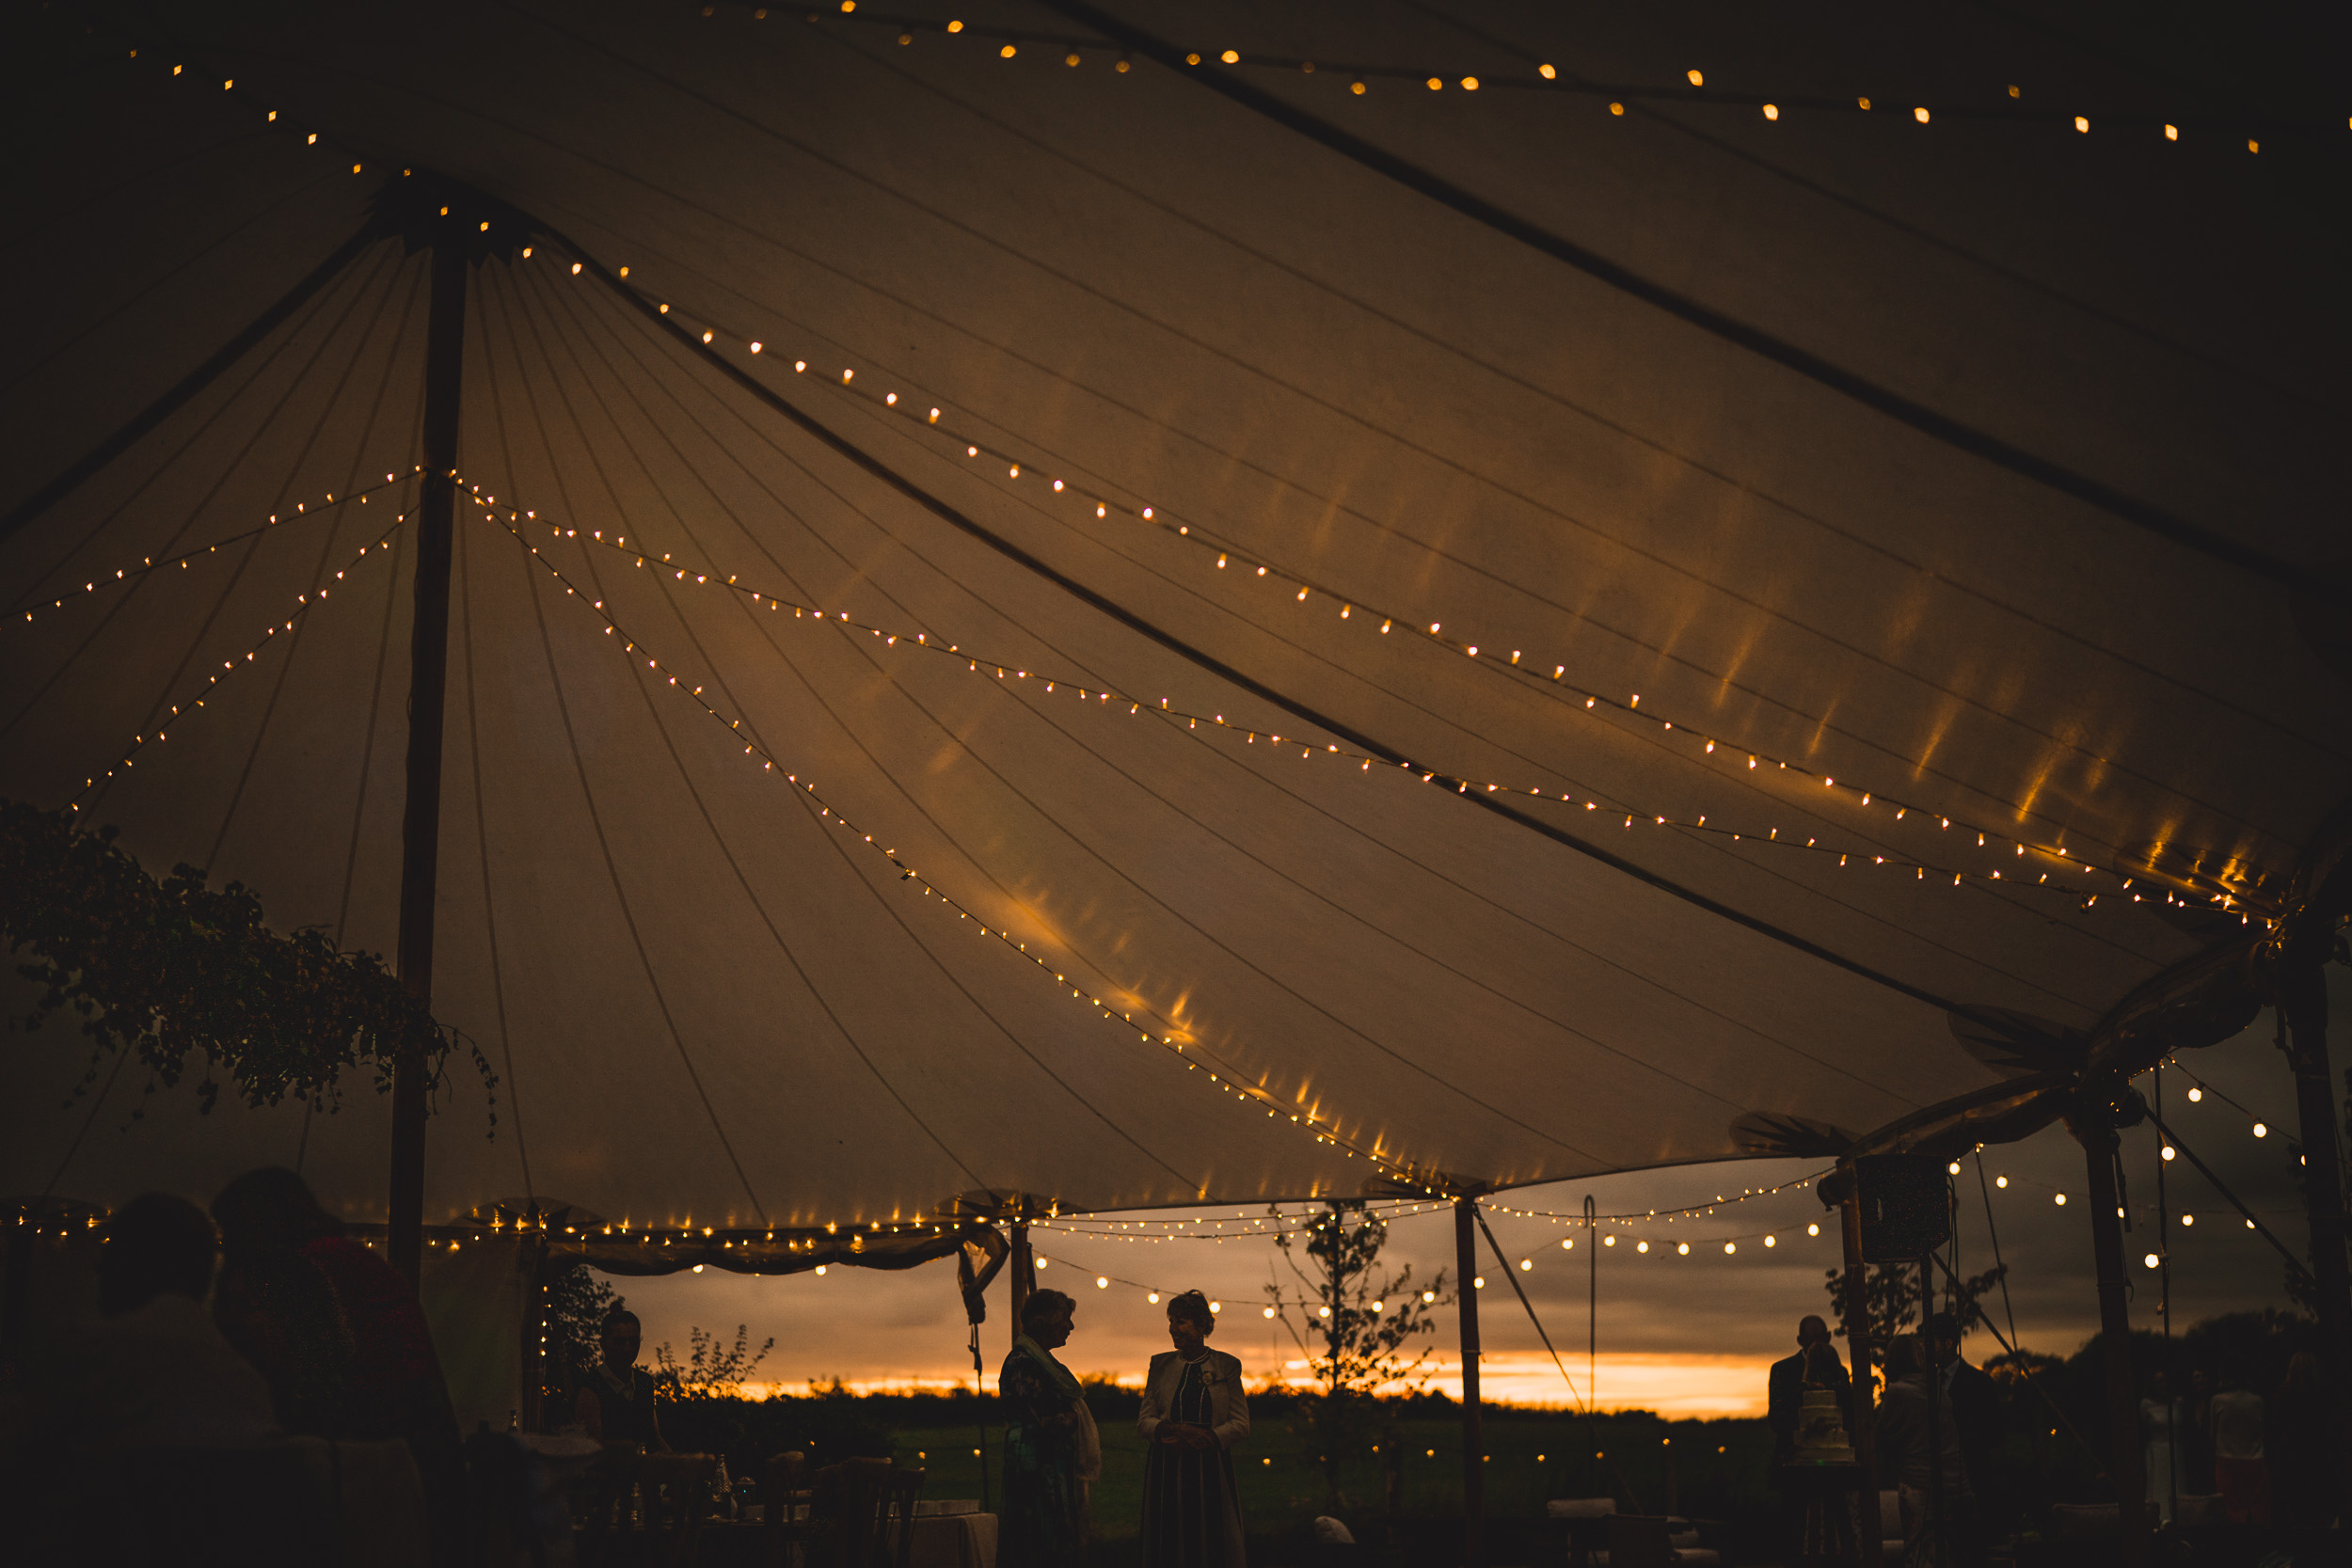 A wedding reception under a tent with string lights, celebrating the bride and groom.